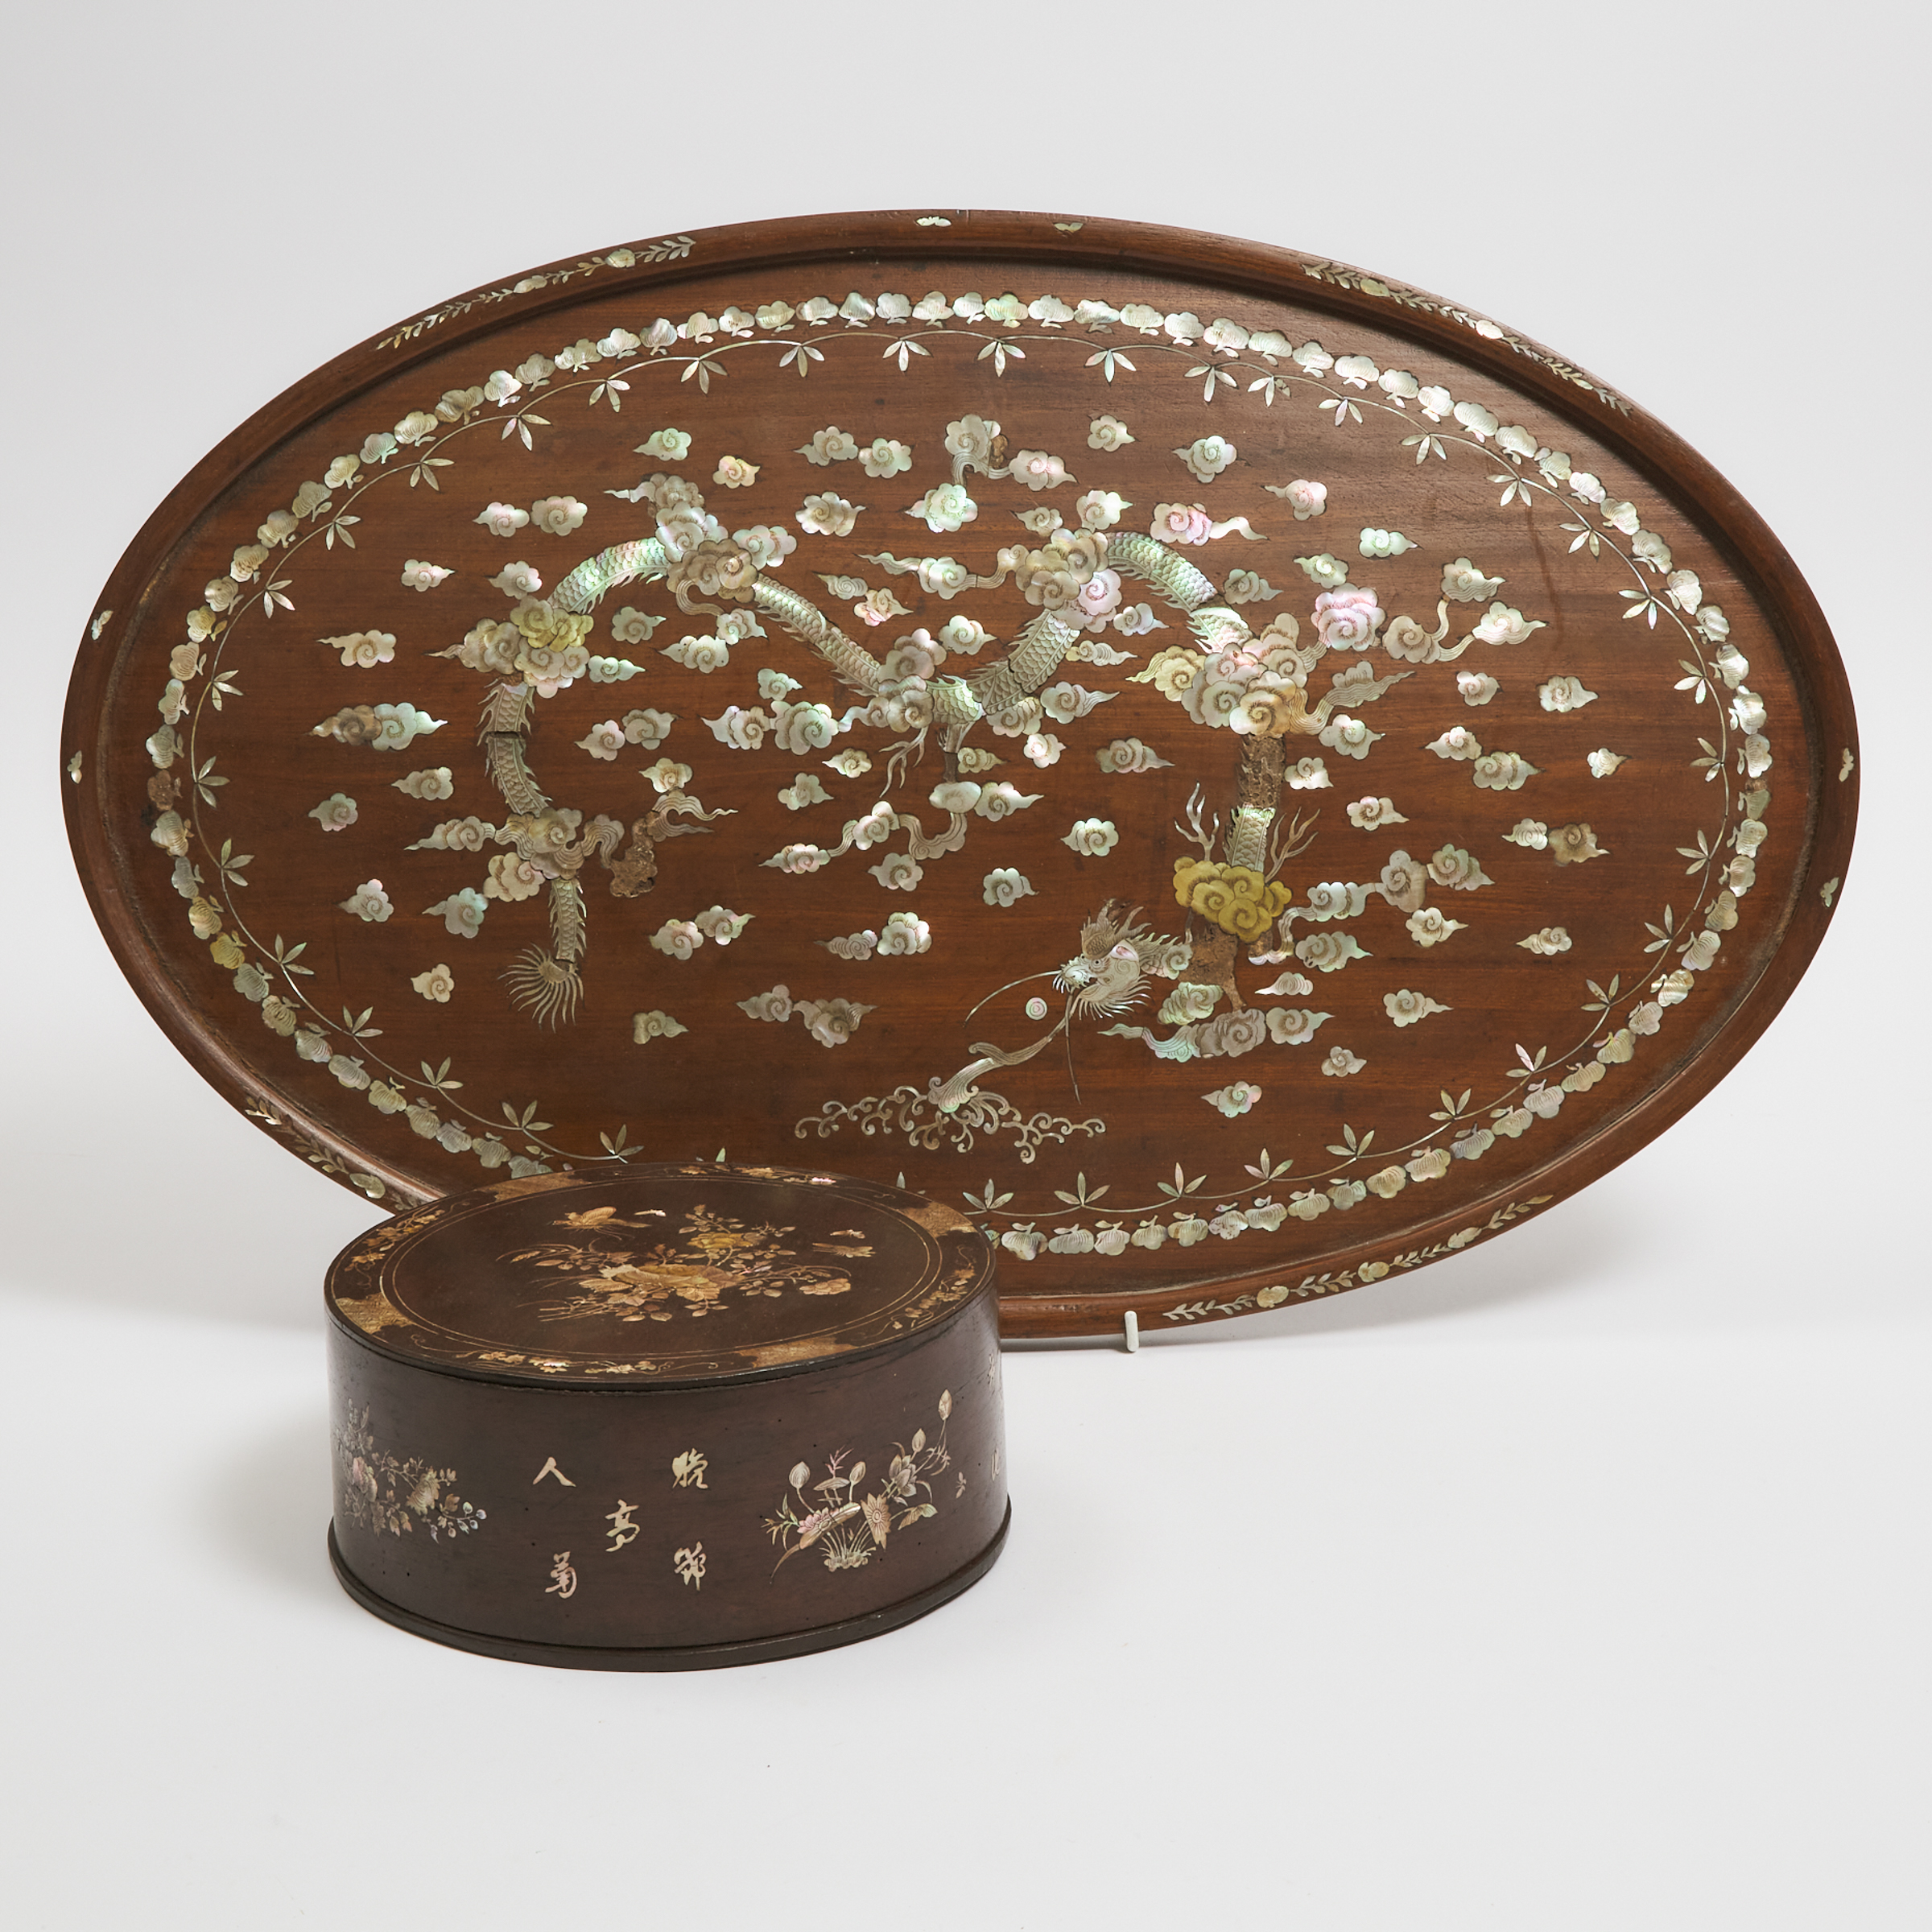 A Mother-of-Pearl Inlaid Circular